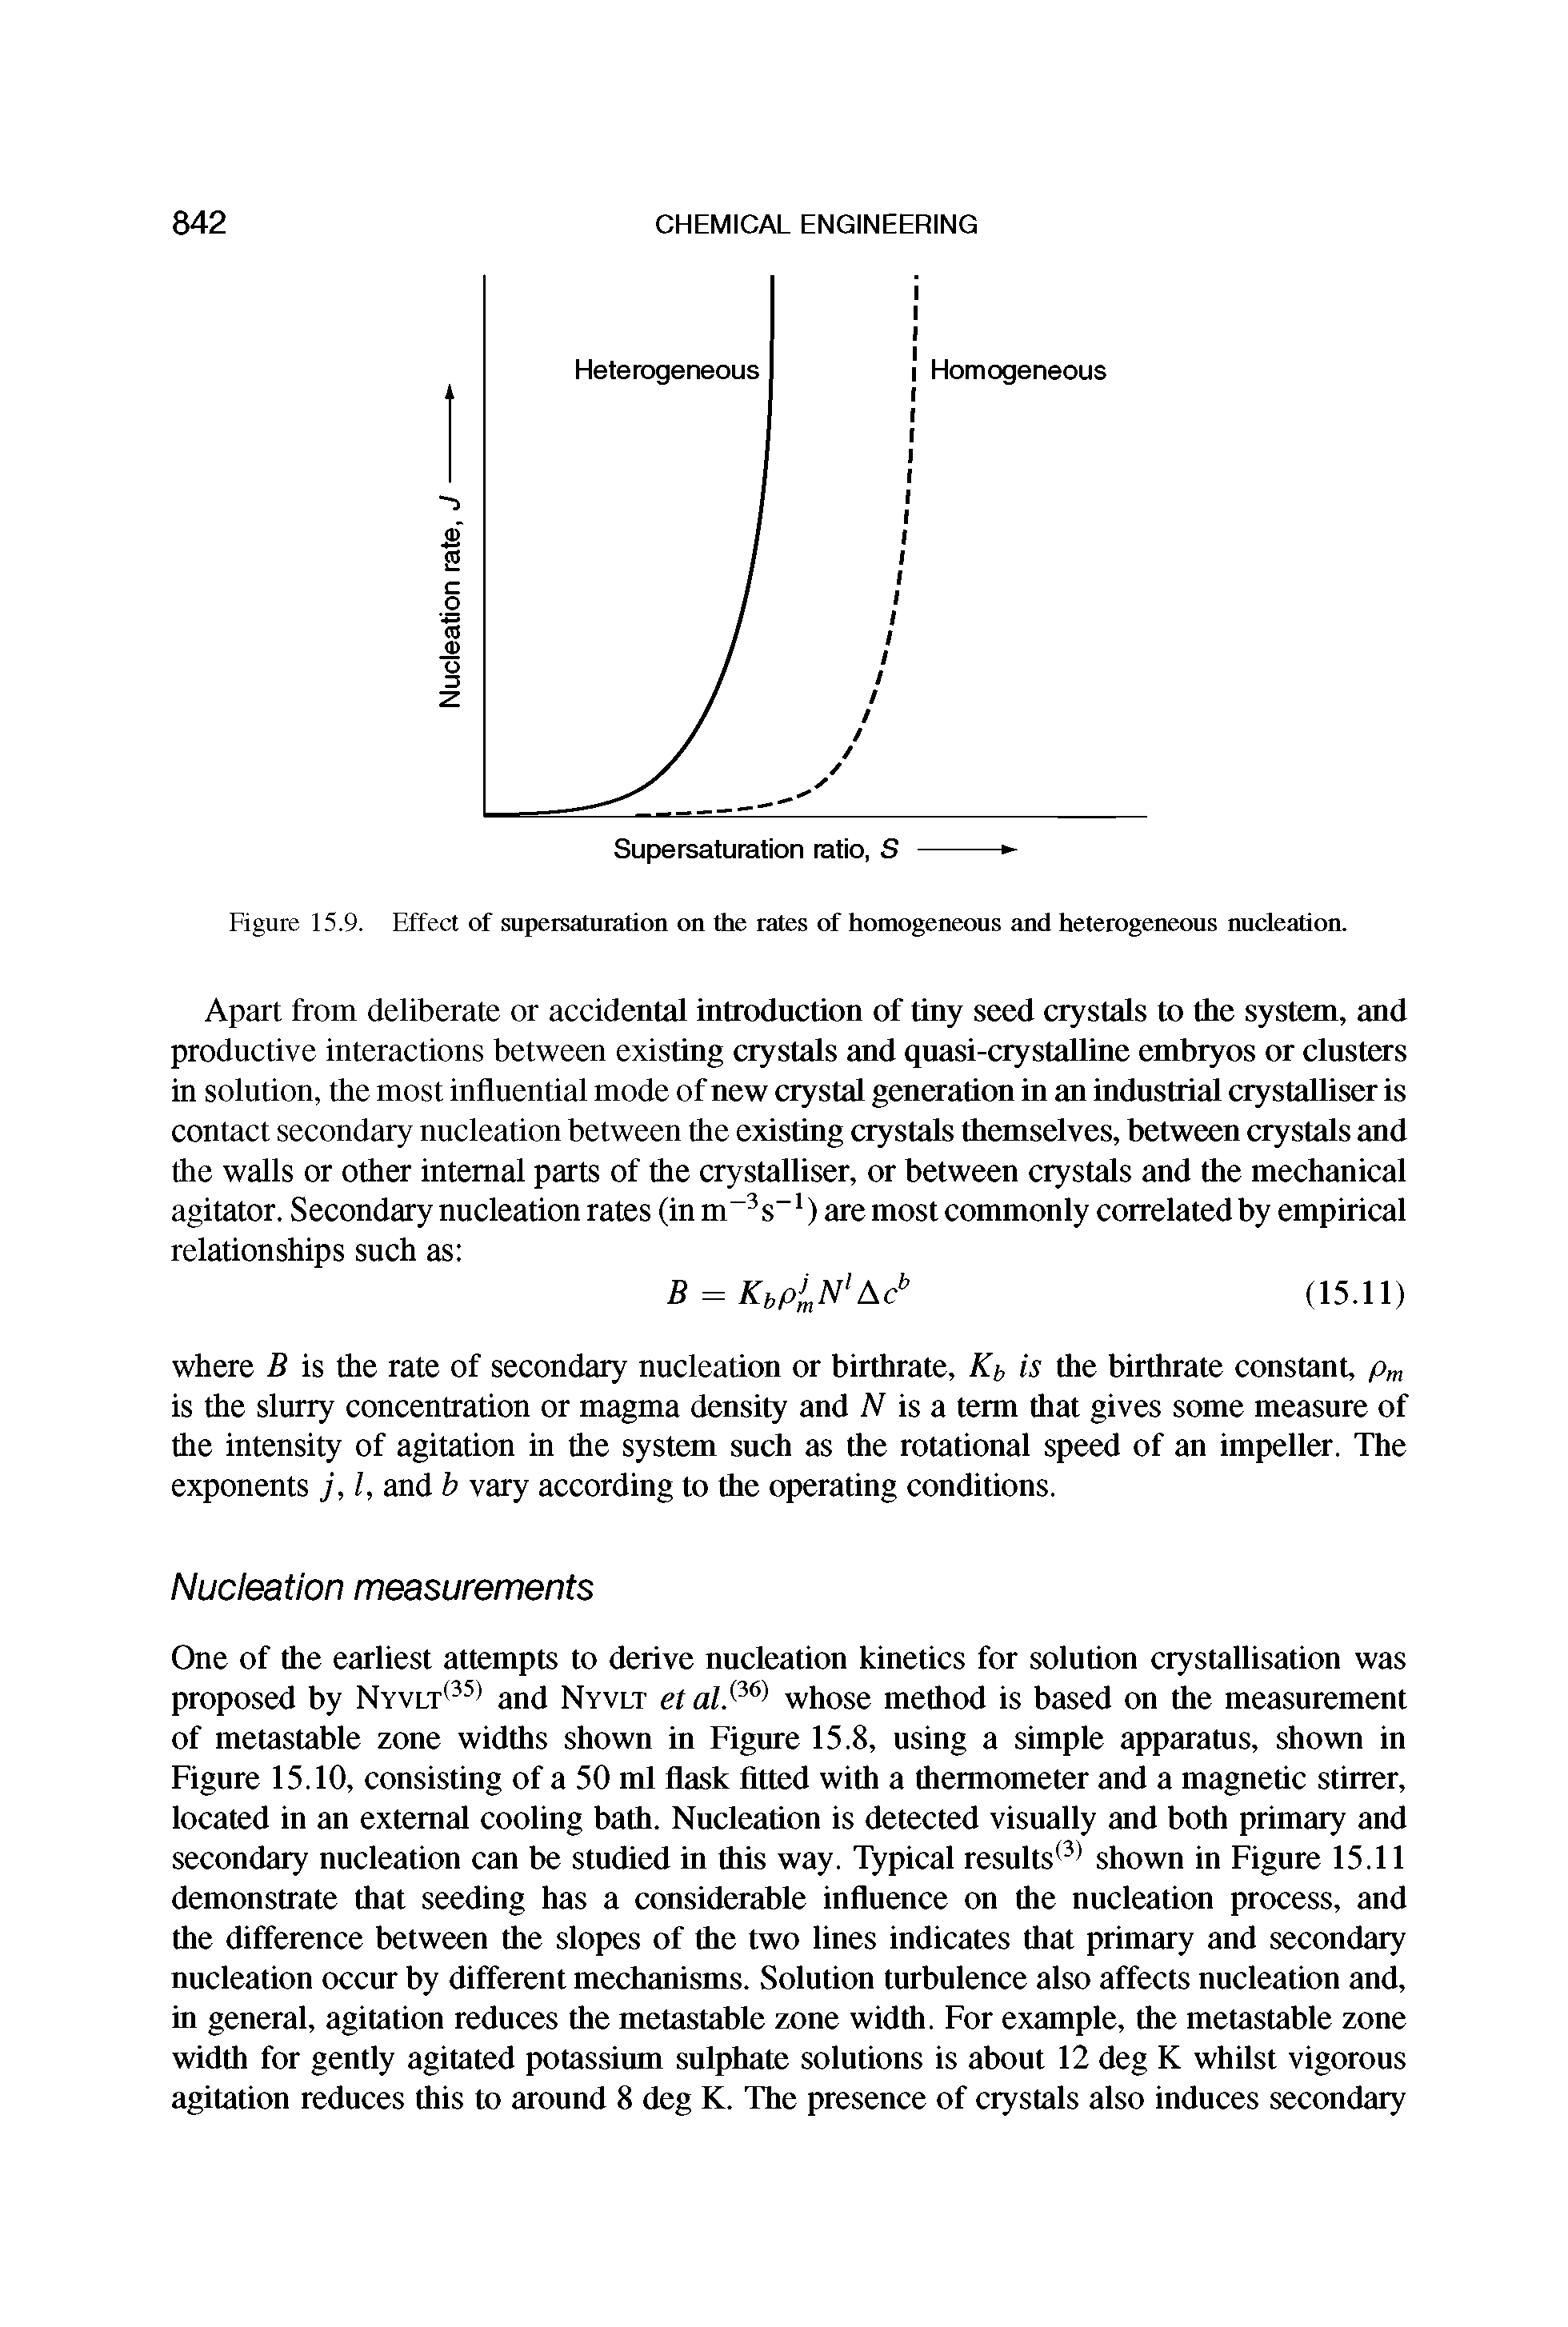 Figure 15.9. Effect of supersaturation on the rates of homogeneous and heterogeneous nucleation.